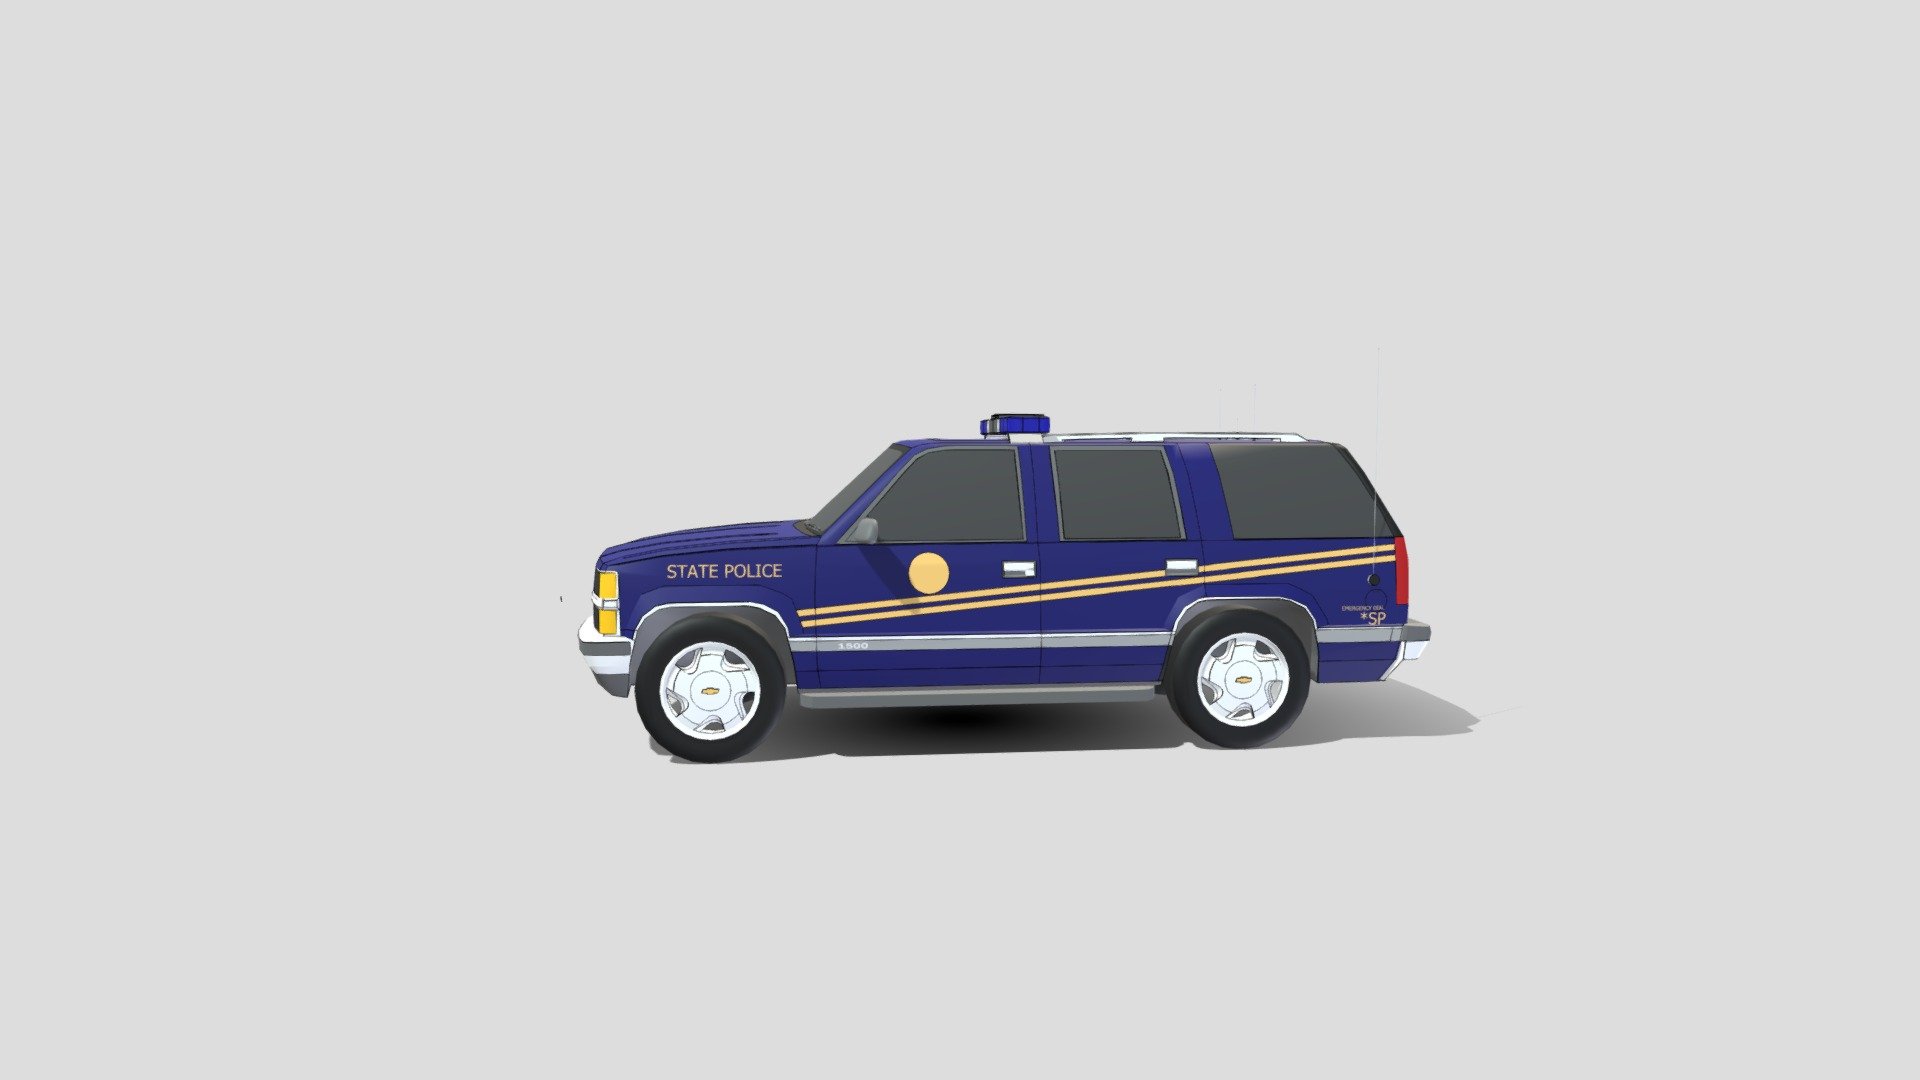 West Virginia State Police Chevy Tahoe 1996